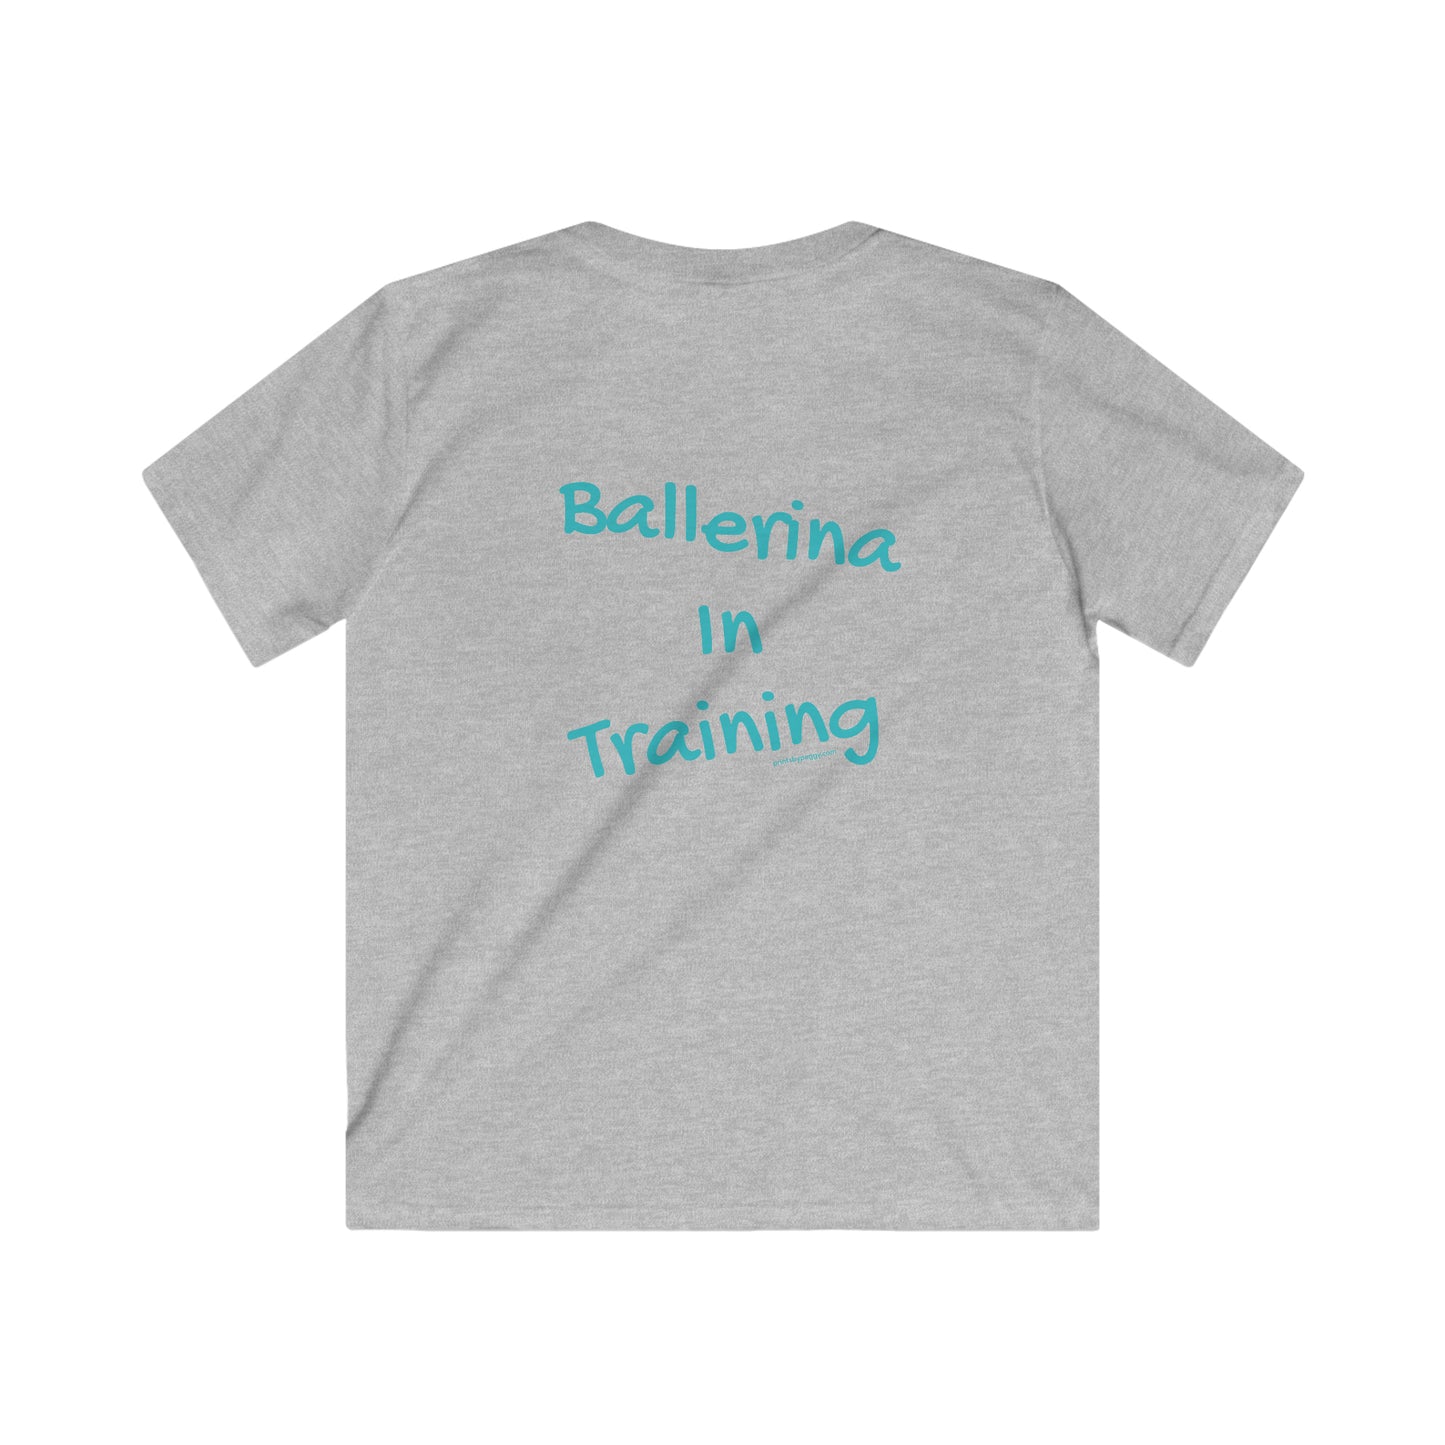 Back view of a gray tee shirt that says Ballerina in Training in blue letters